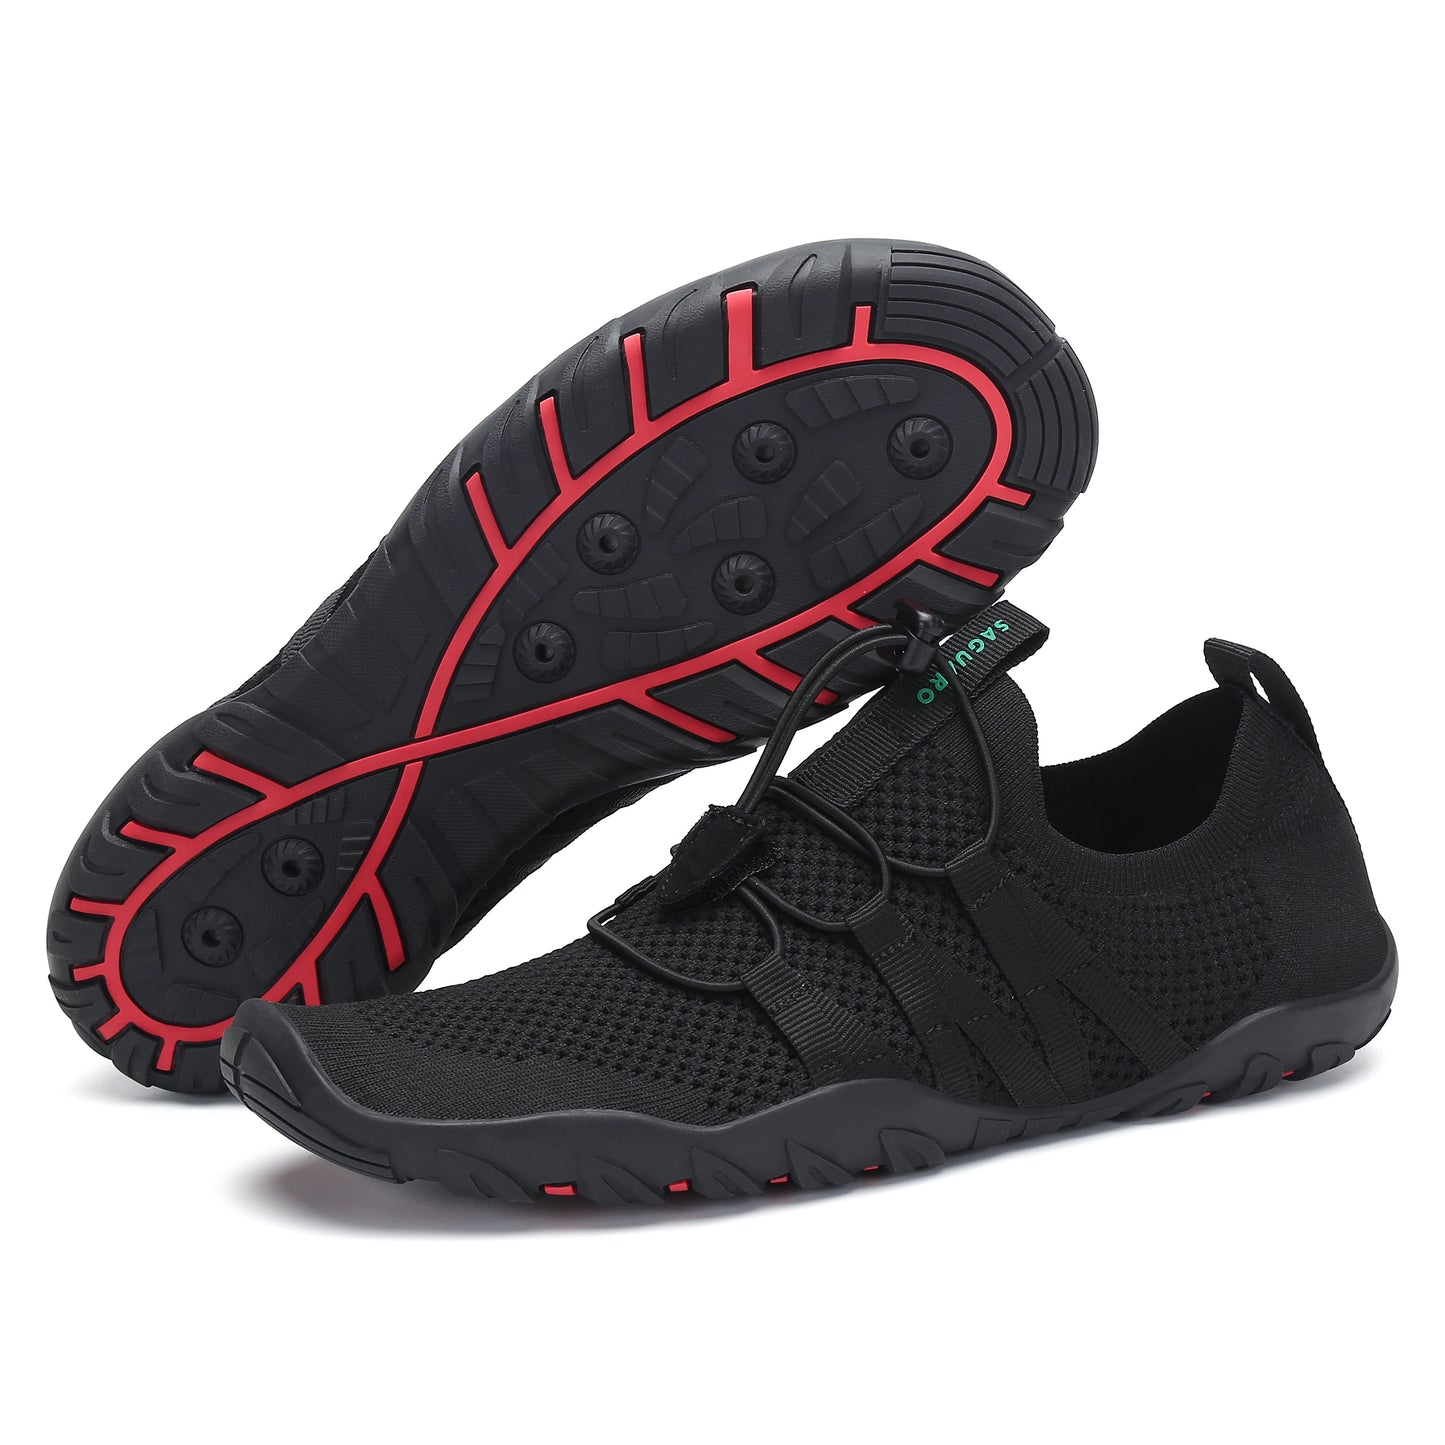 Dive V - Negro - Barefoot Watershoes